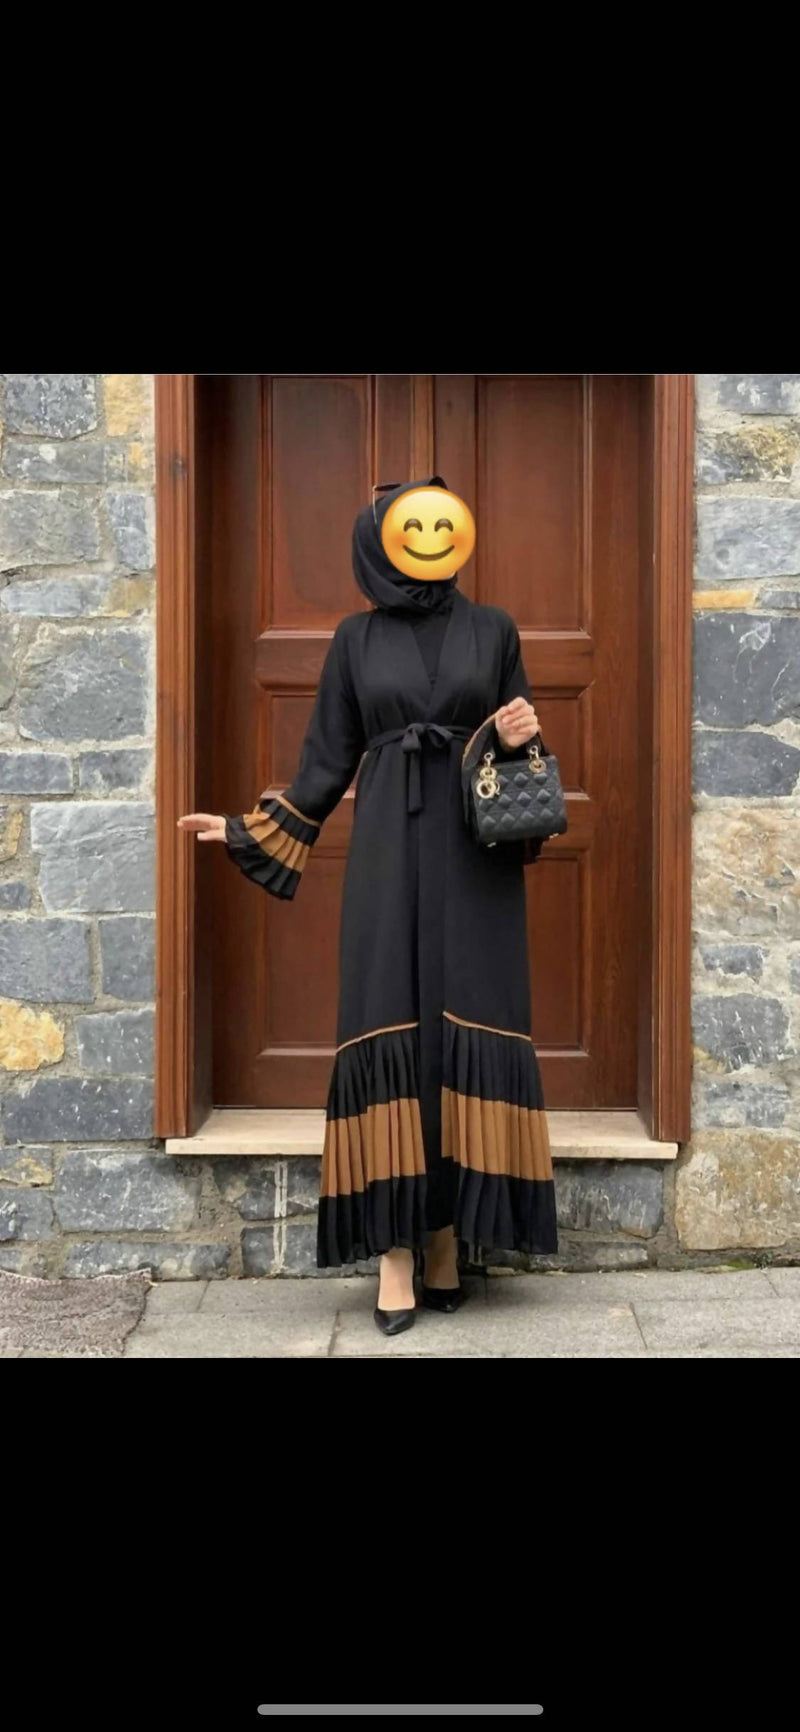 Look absolutely stunning in this frill abaya cardigan! You can style this with a slip dress or a top! 